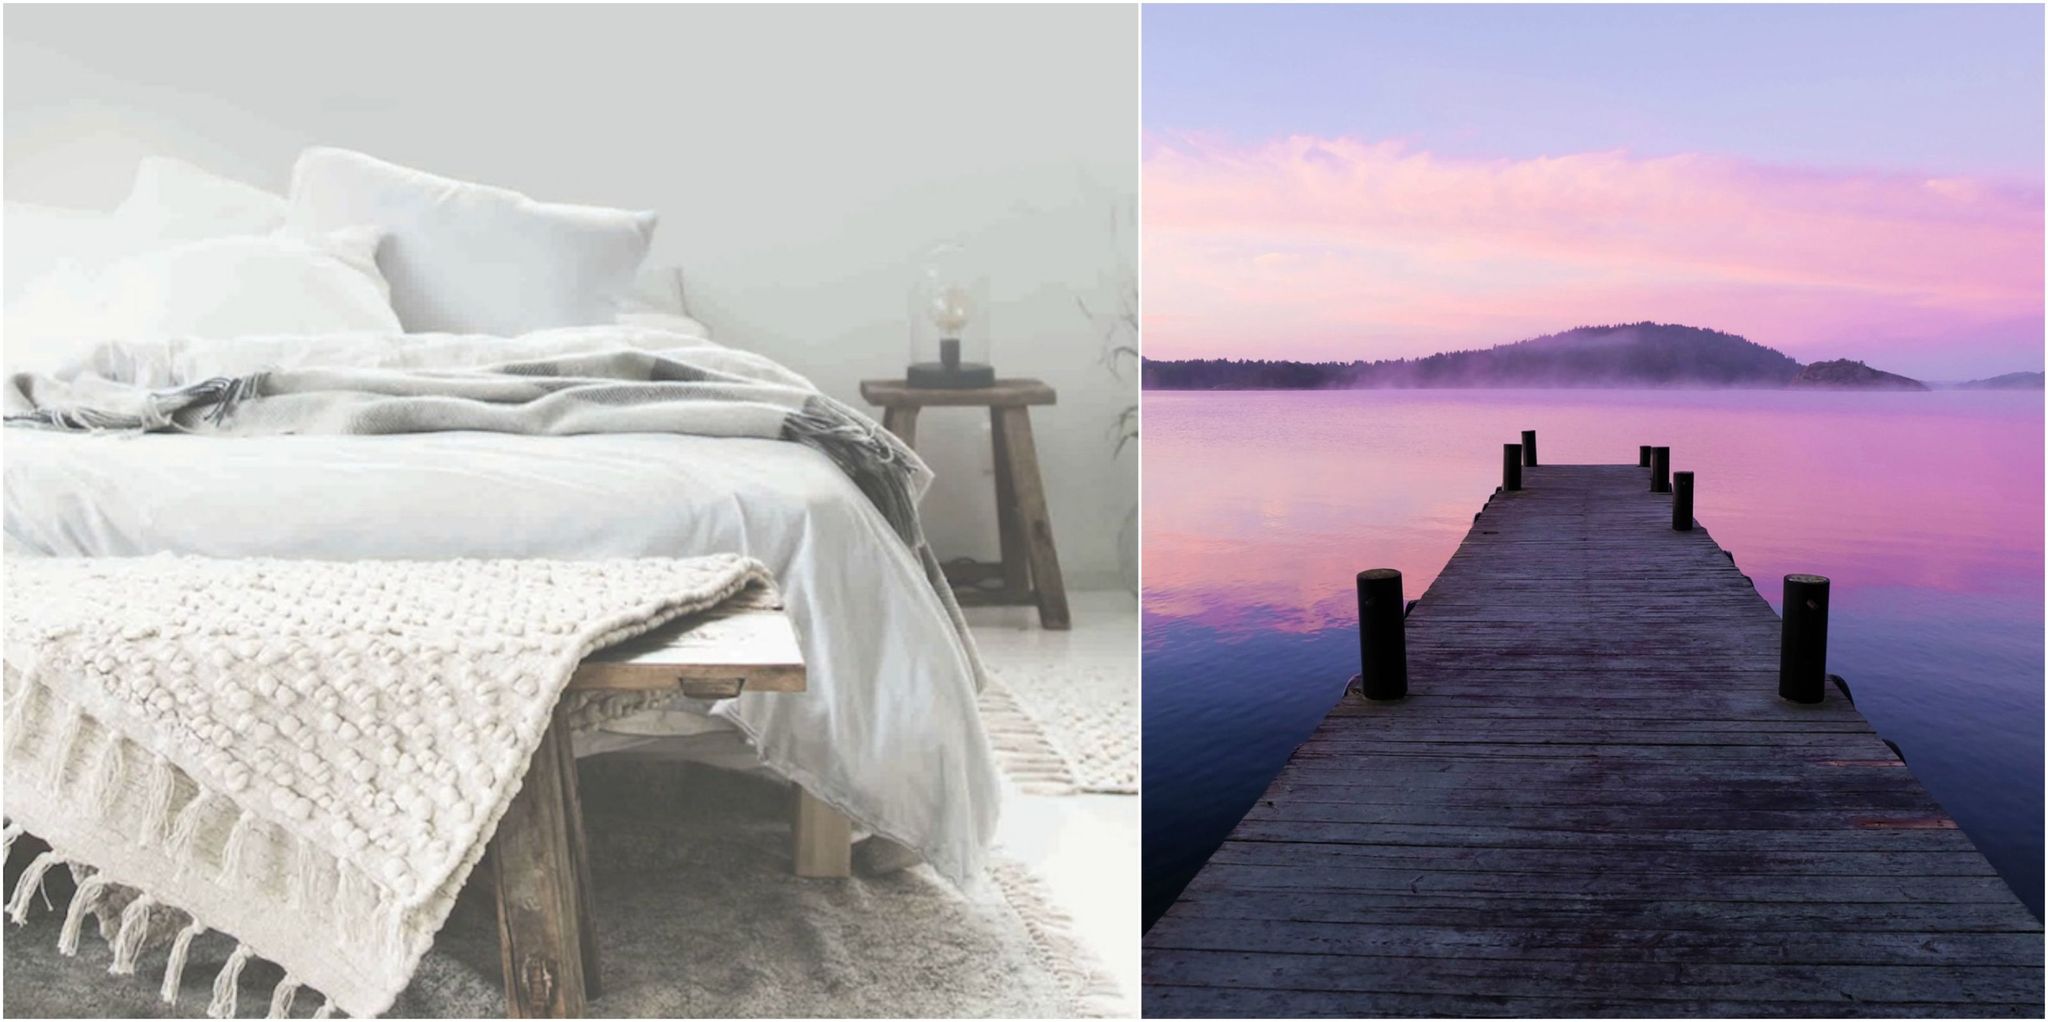 Swedish bed and lake collage